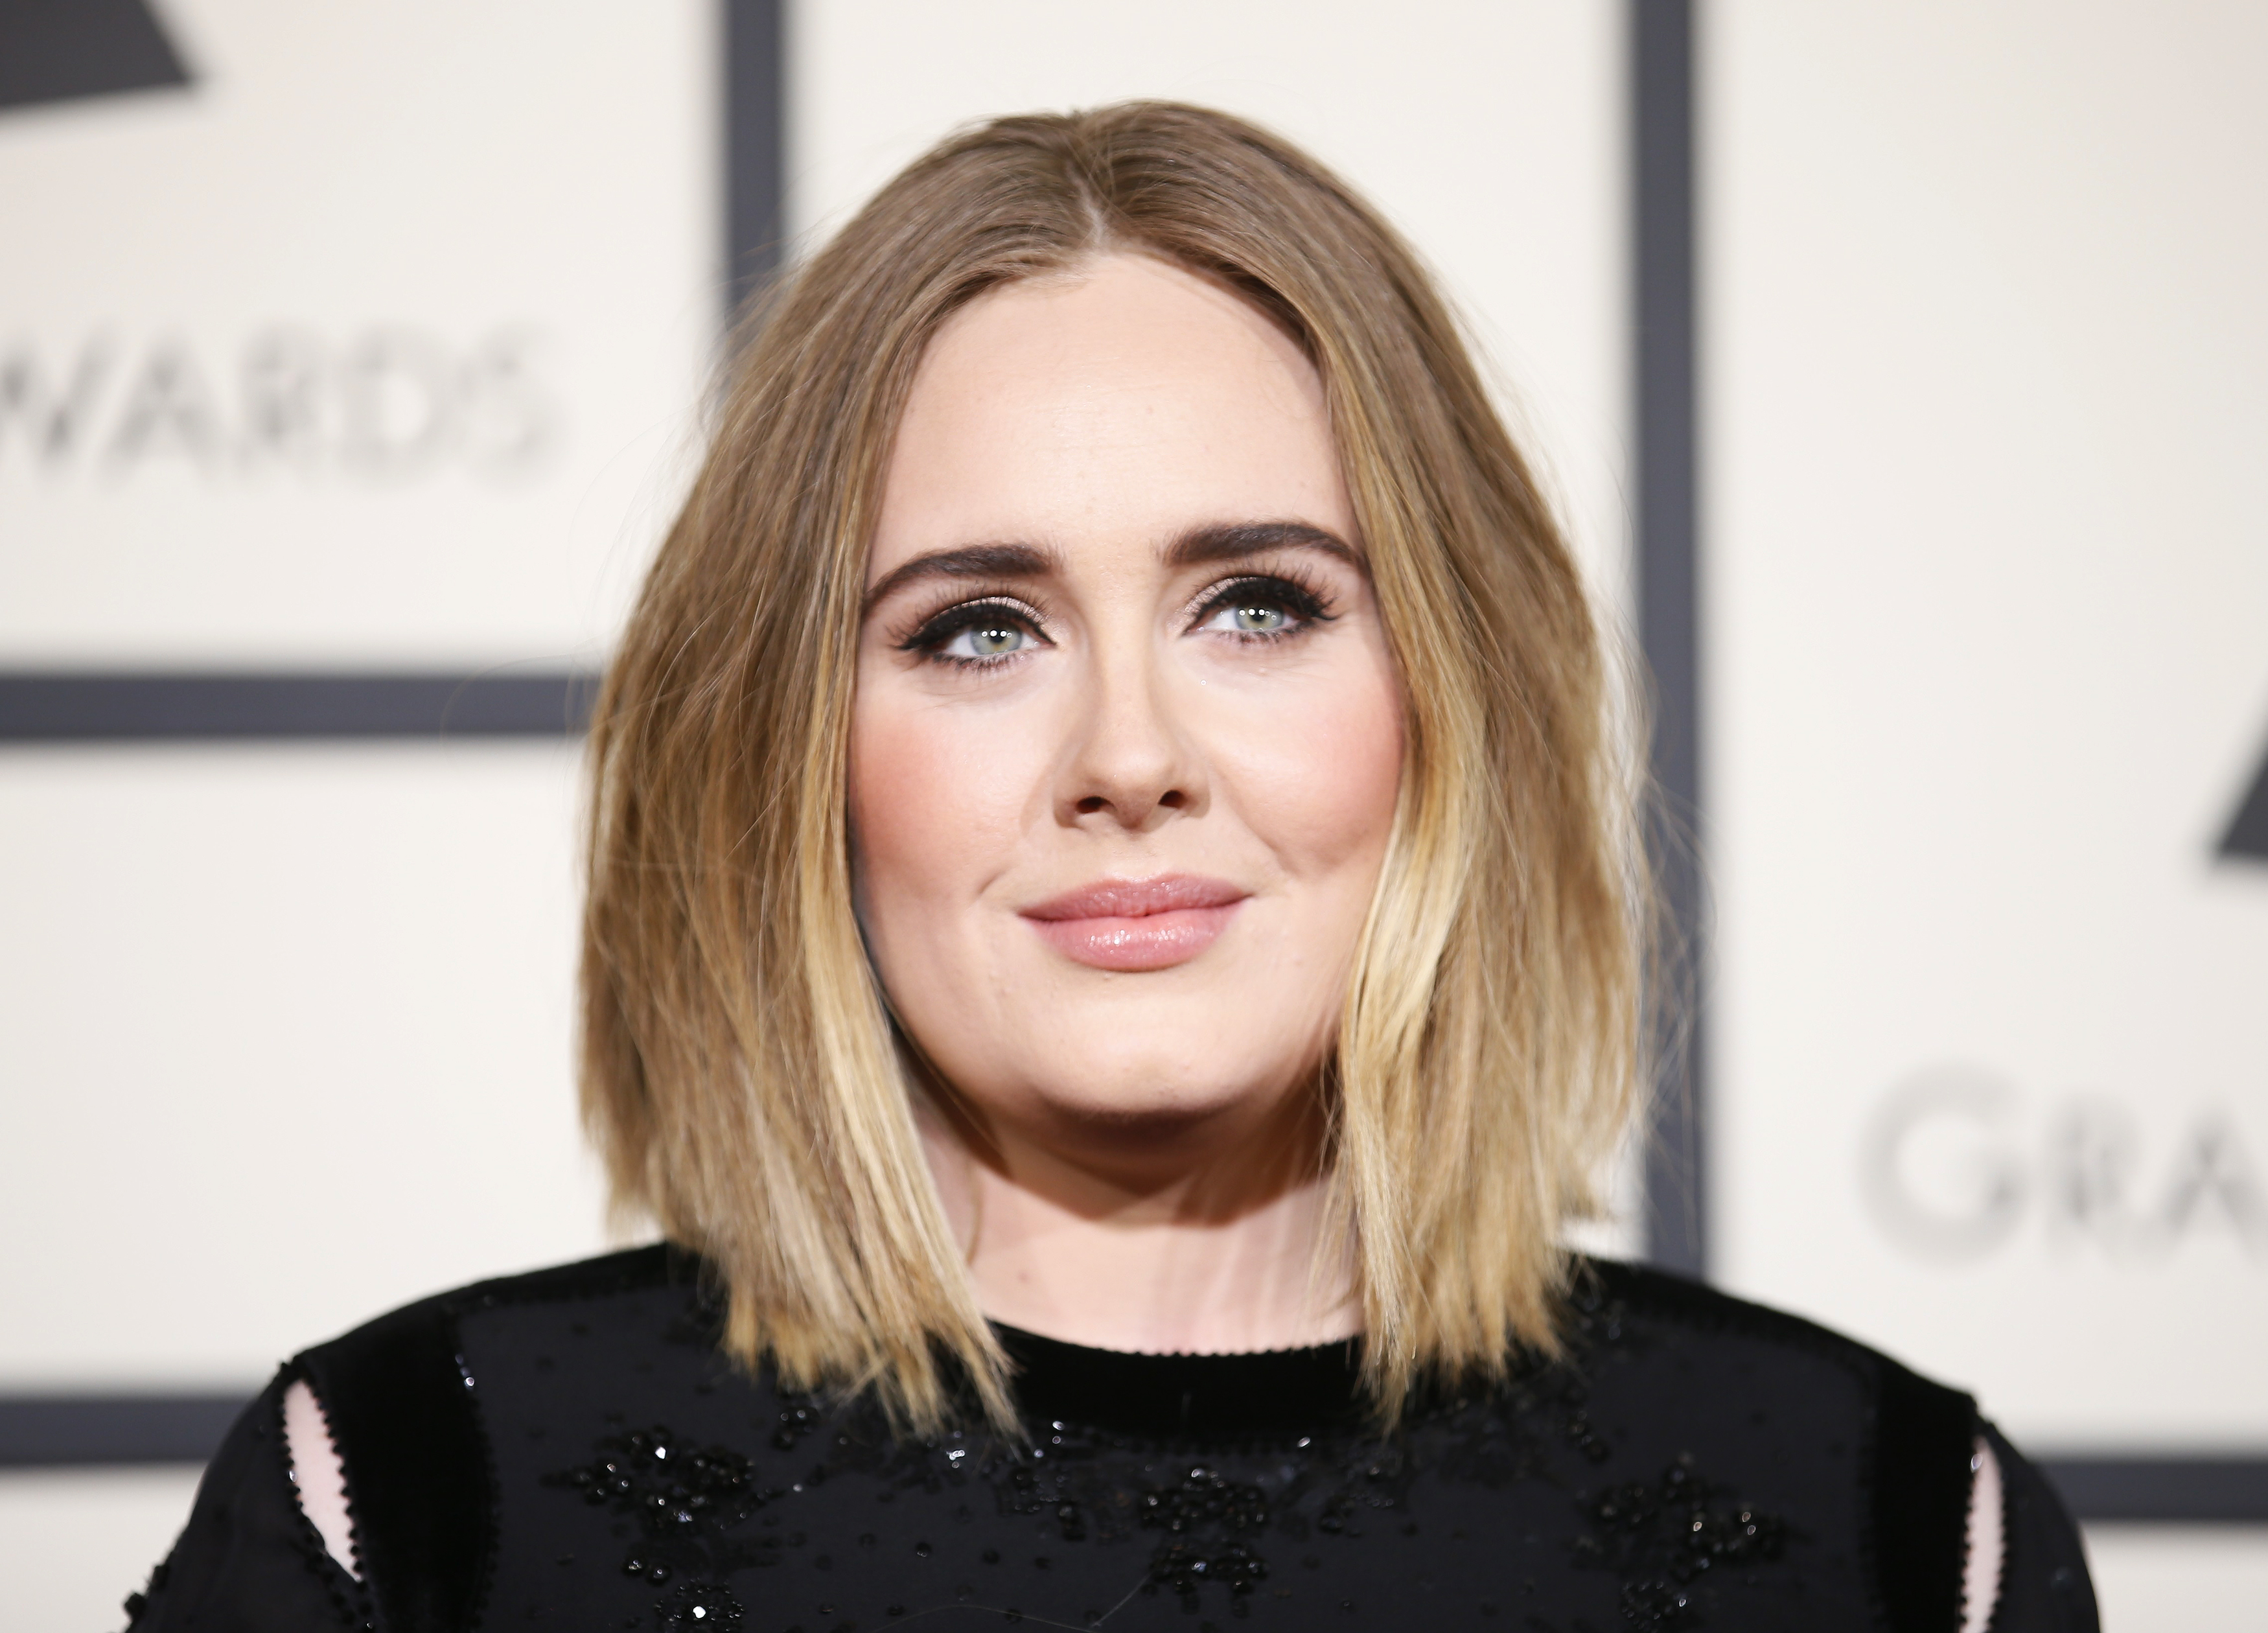 Singer Adele arrives at the 58th Grammy Awards in Los Angeles, California February 15, 2016. (© Danny Moloshok / Reuters—REUTERS)